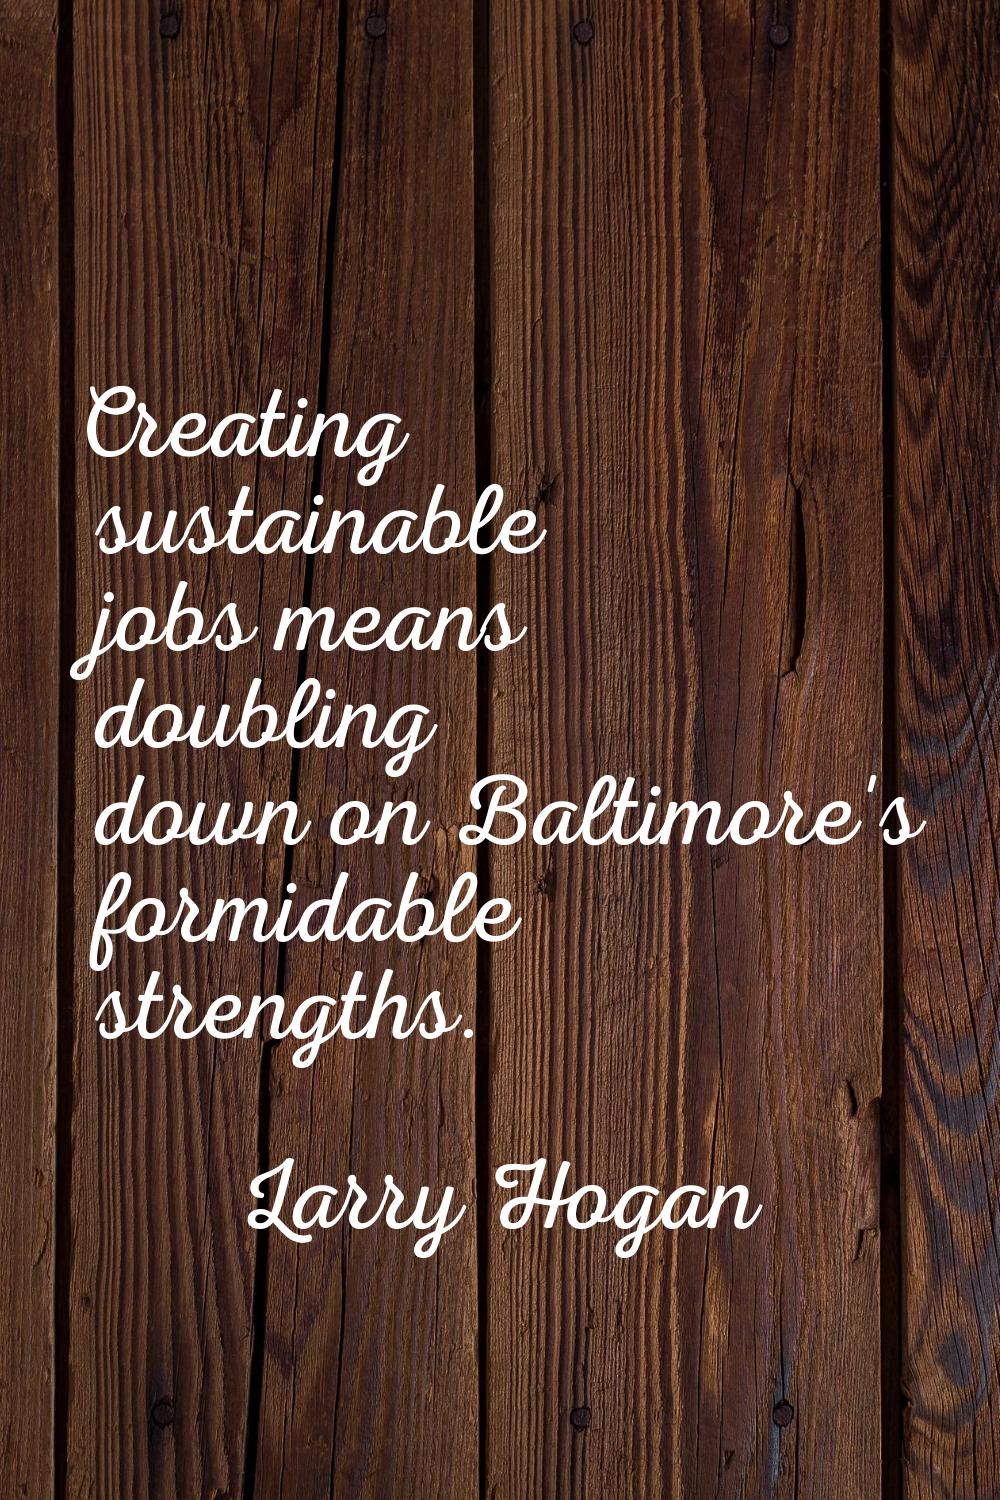 Creating sustainable jobs means doubling down on Baltimore's formidable strengths.